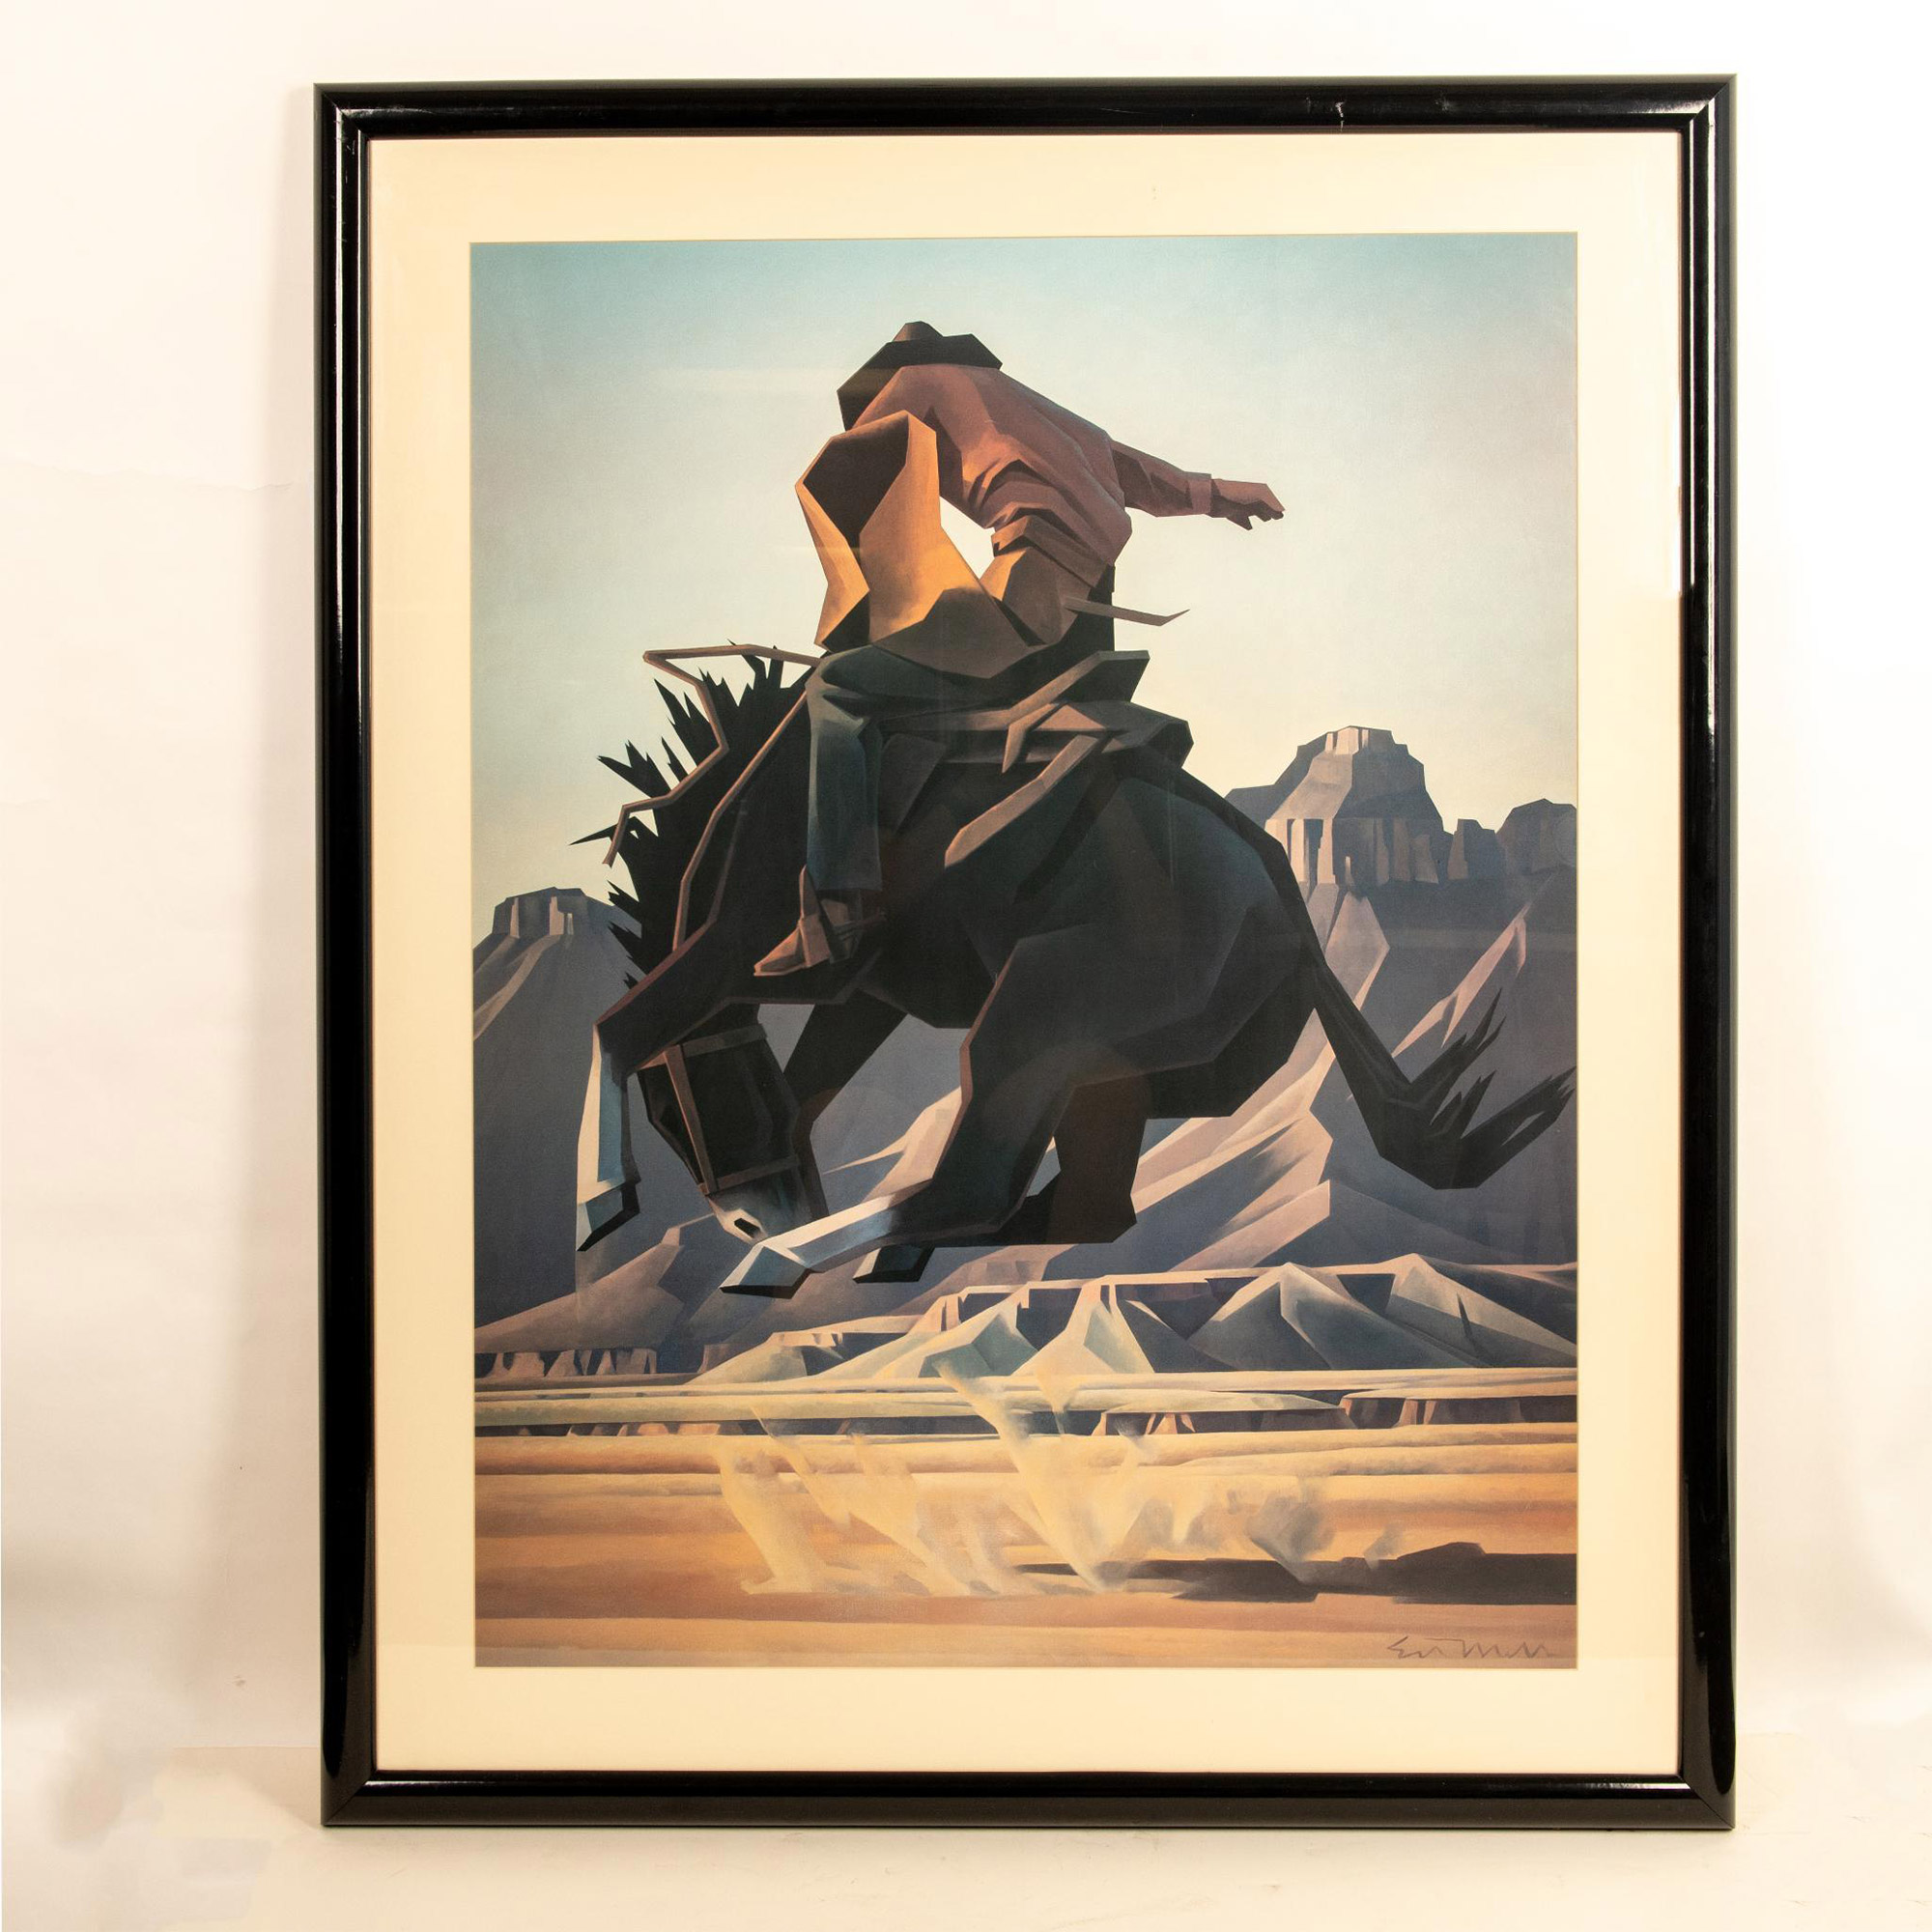 Ed Mell, Western Art Large Color Print on Paper, Cowboy